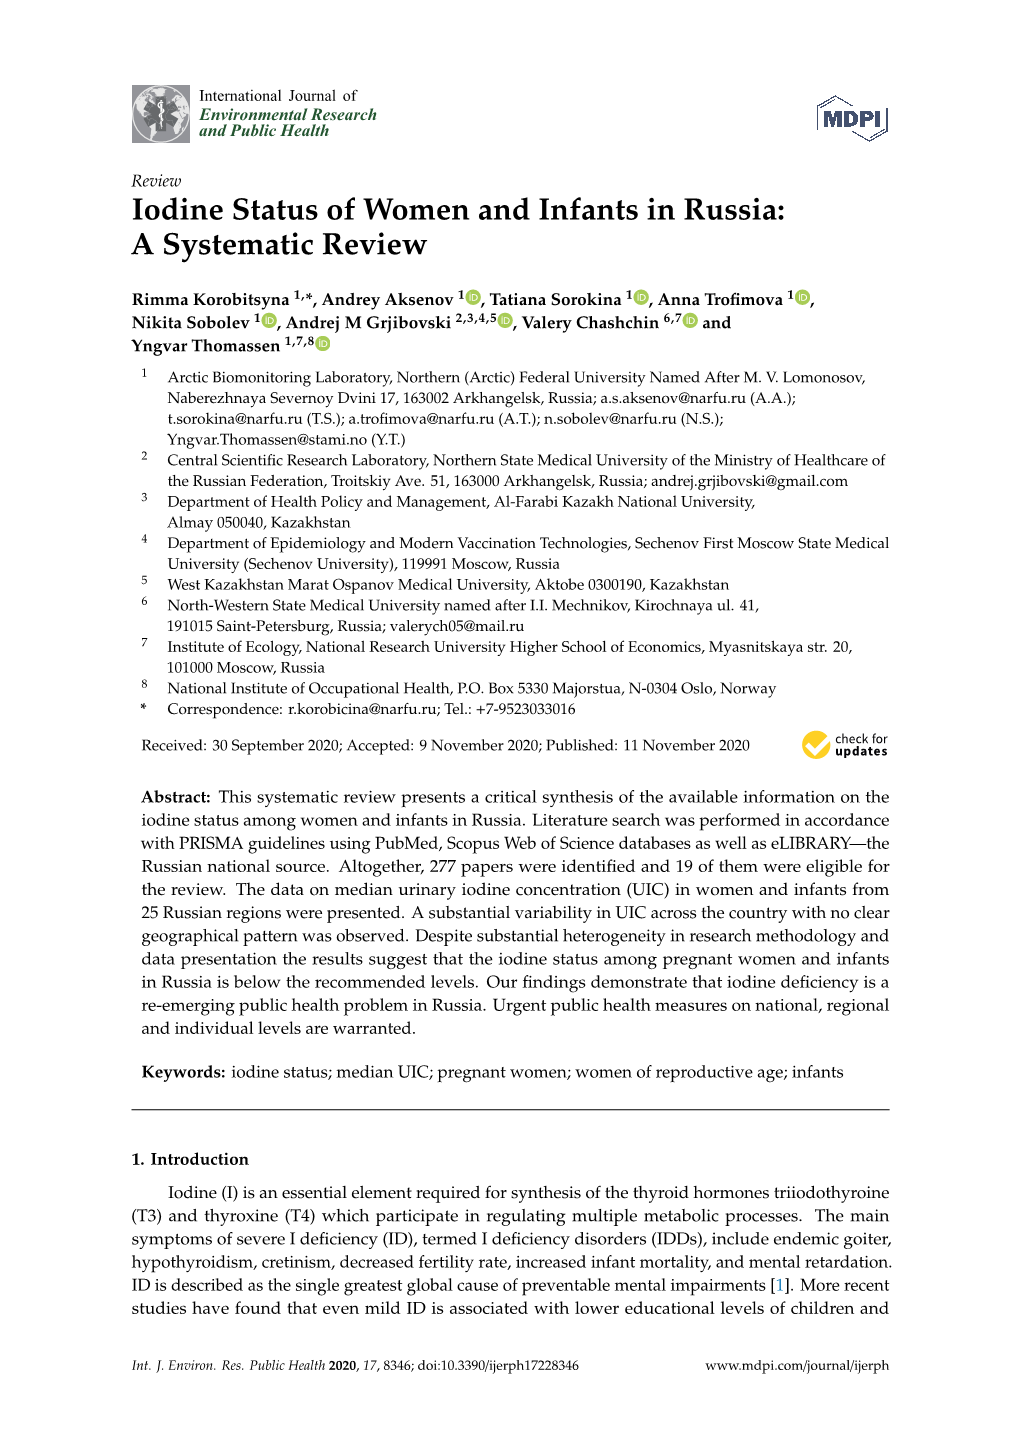 Iodine Status of Women and Infants in Russia: a Systematic Review